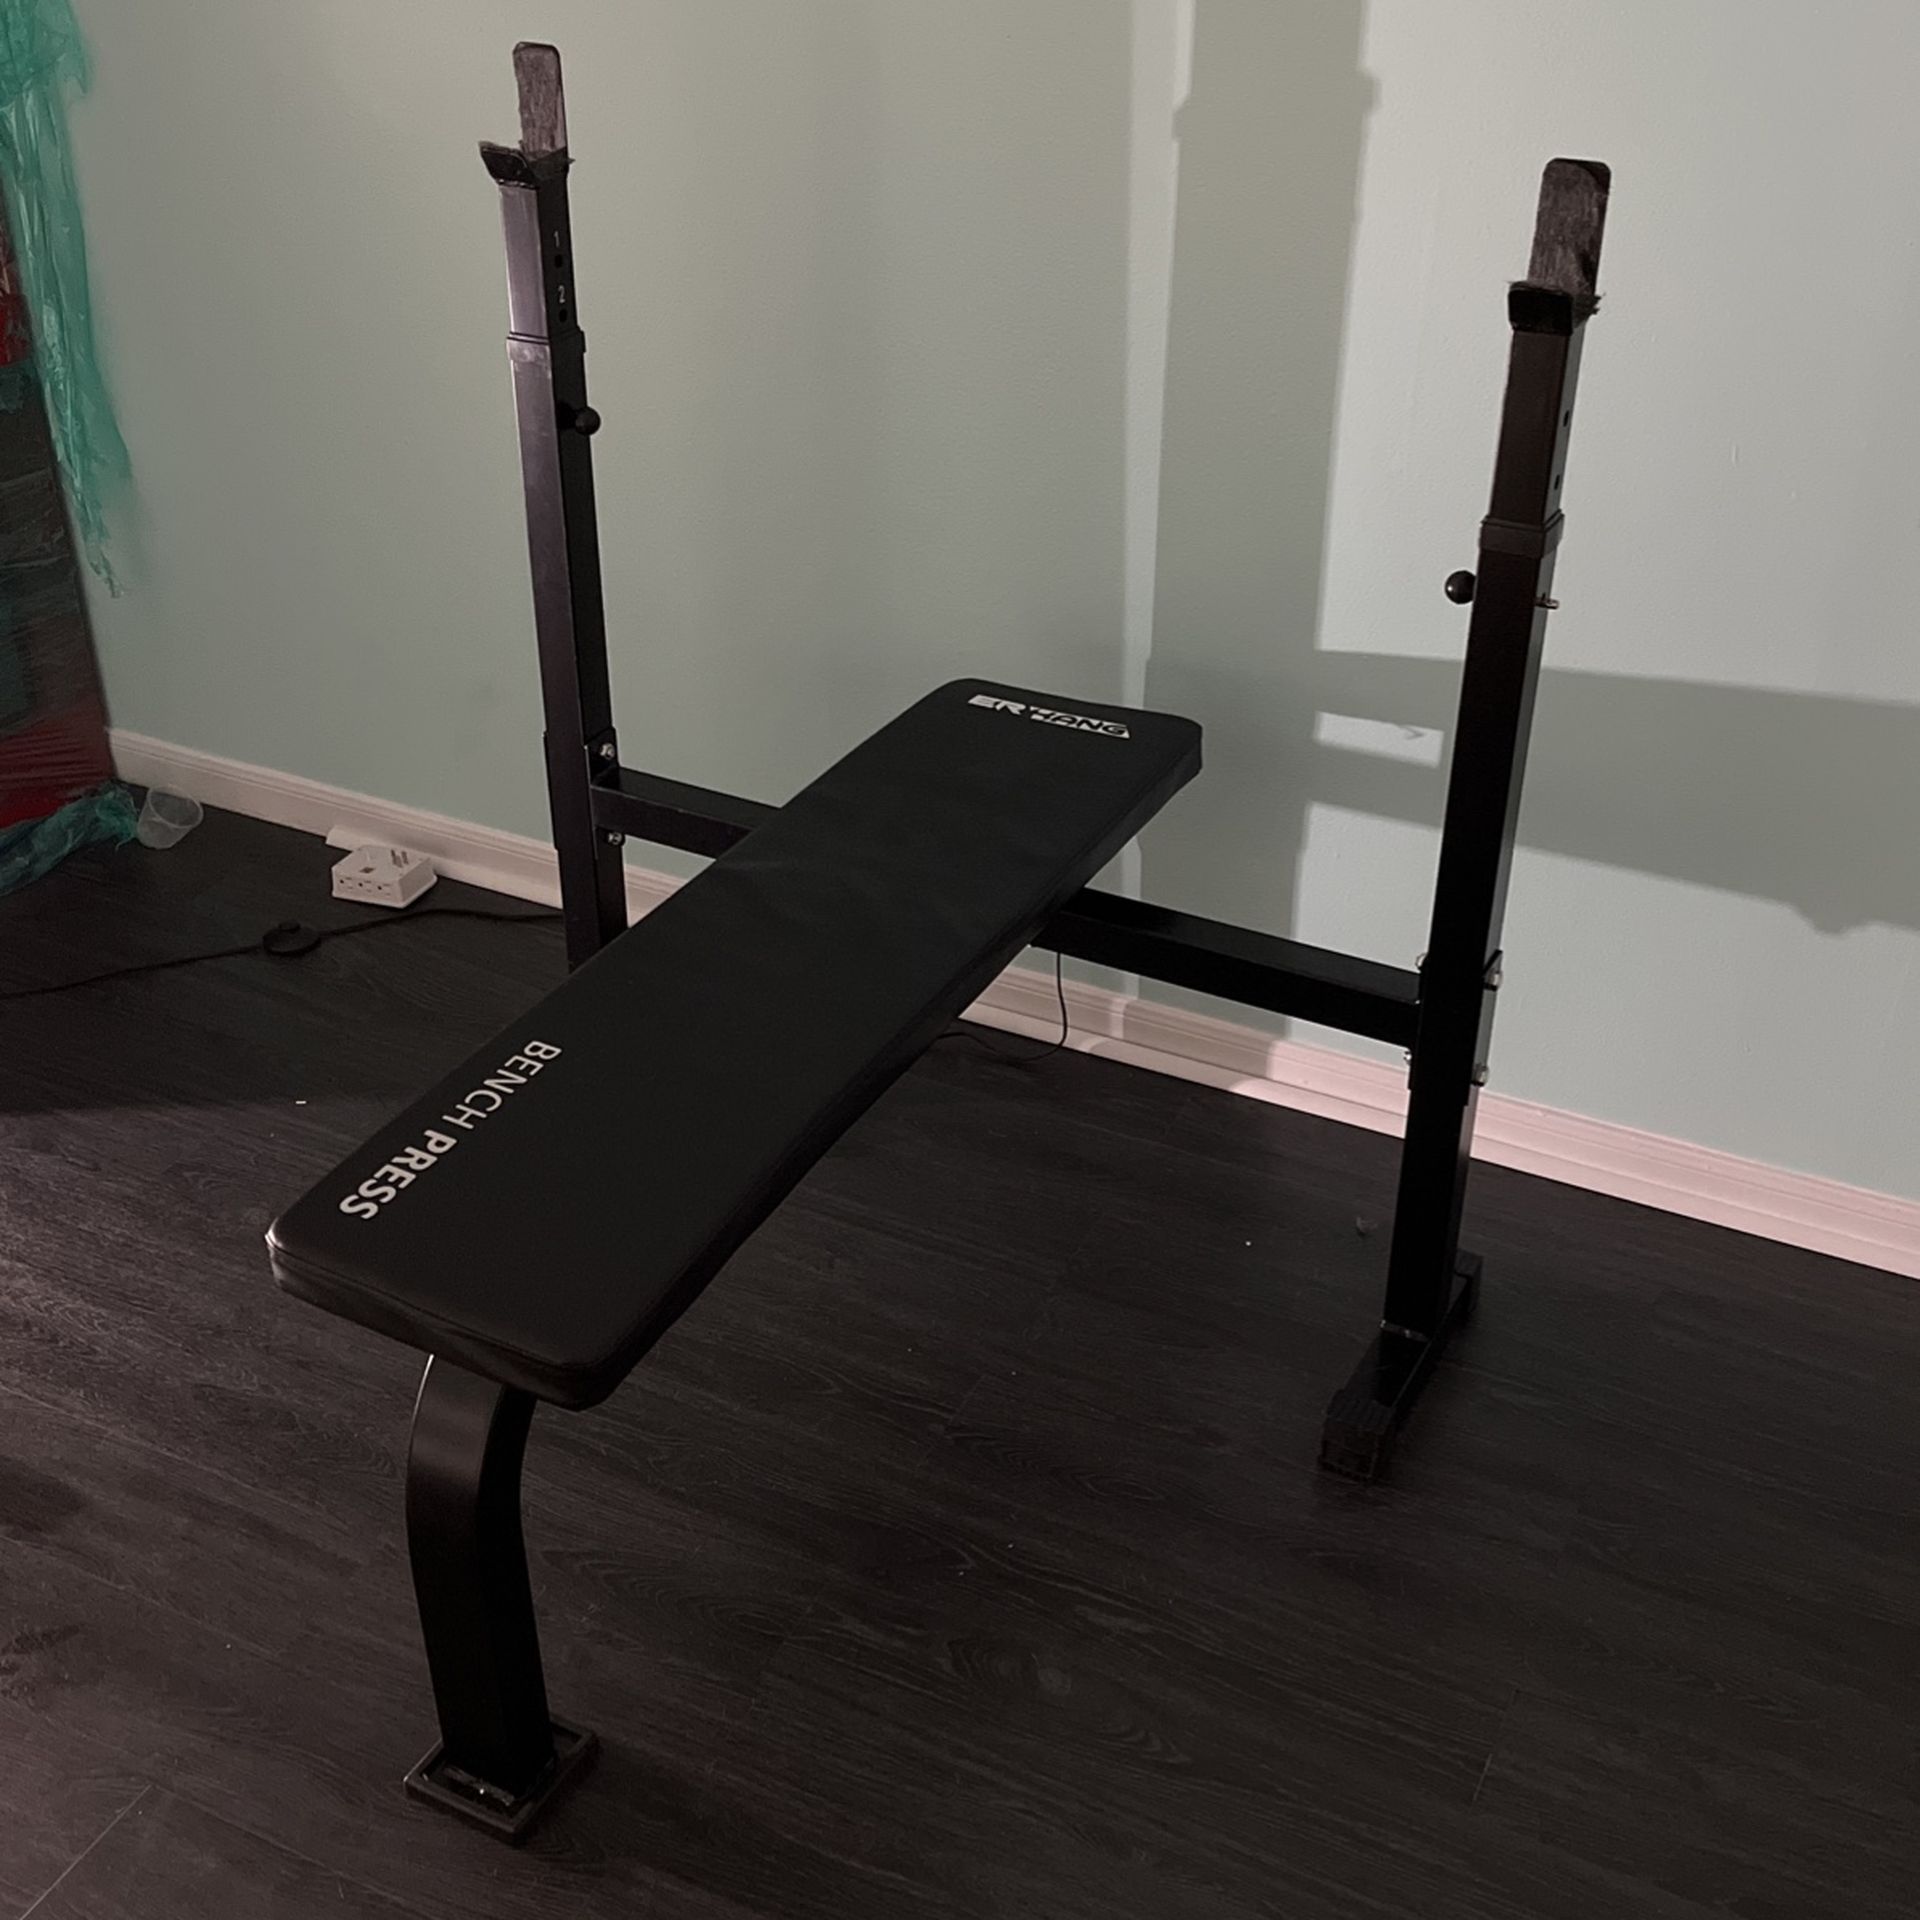 Adjustable Bench press : Does not come with barbell